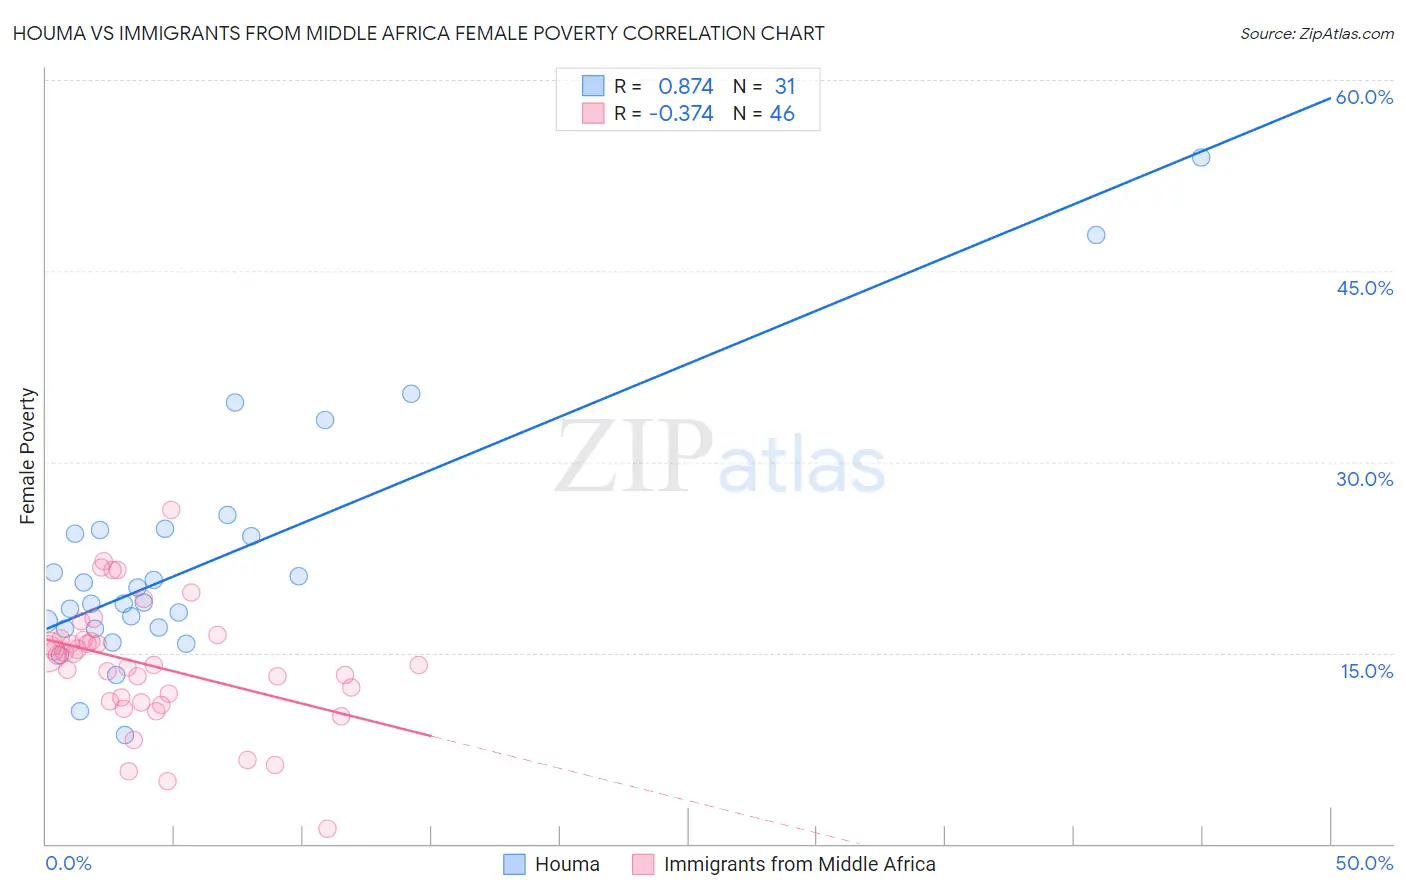 Houma vs Immigrants from Middle Africa Female Poverty